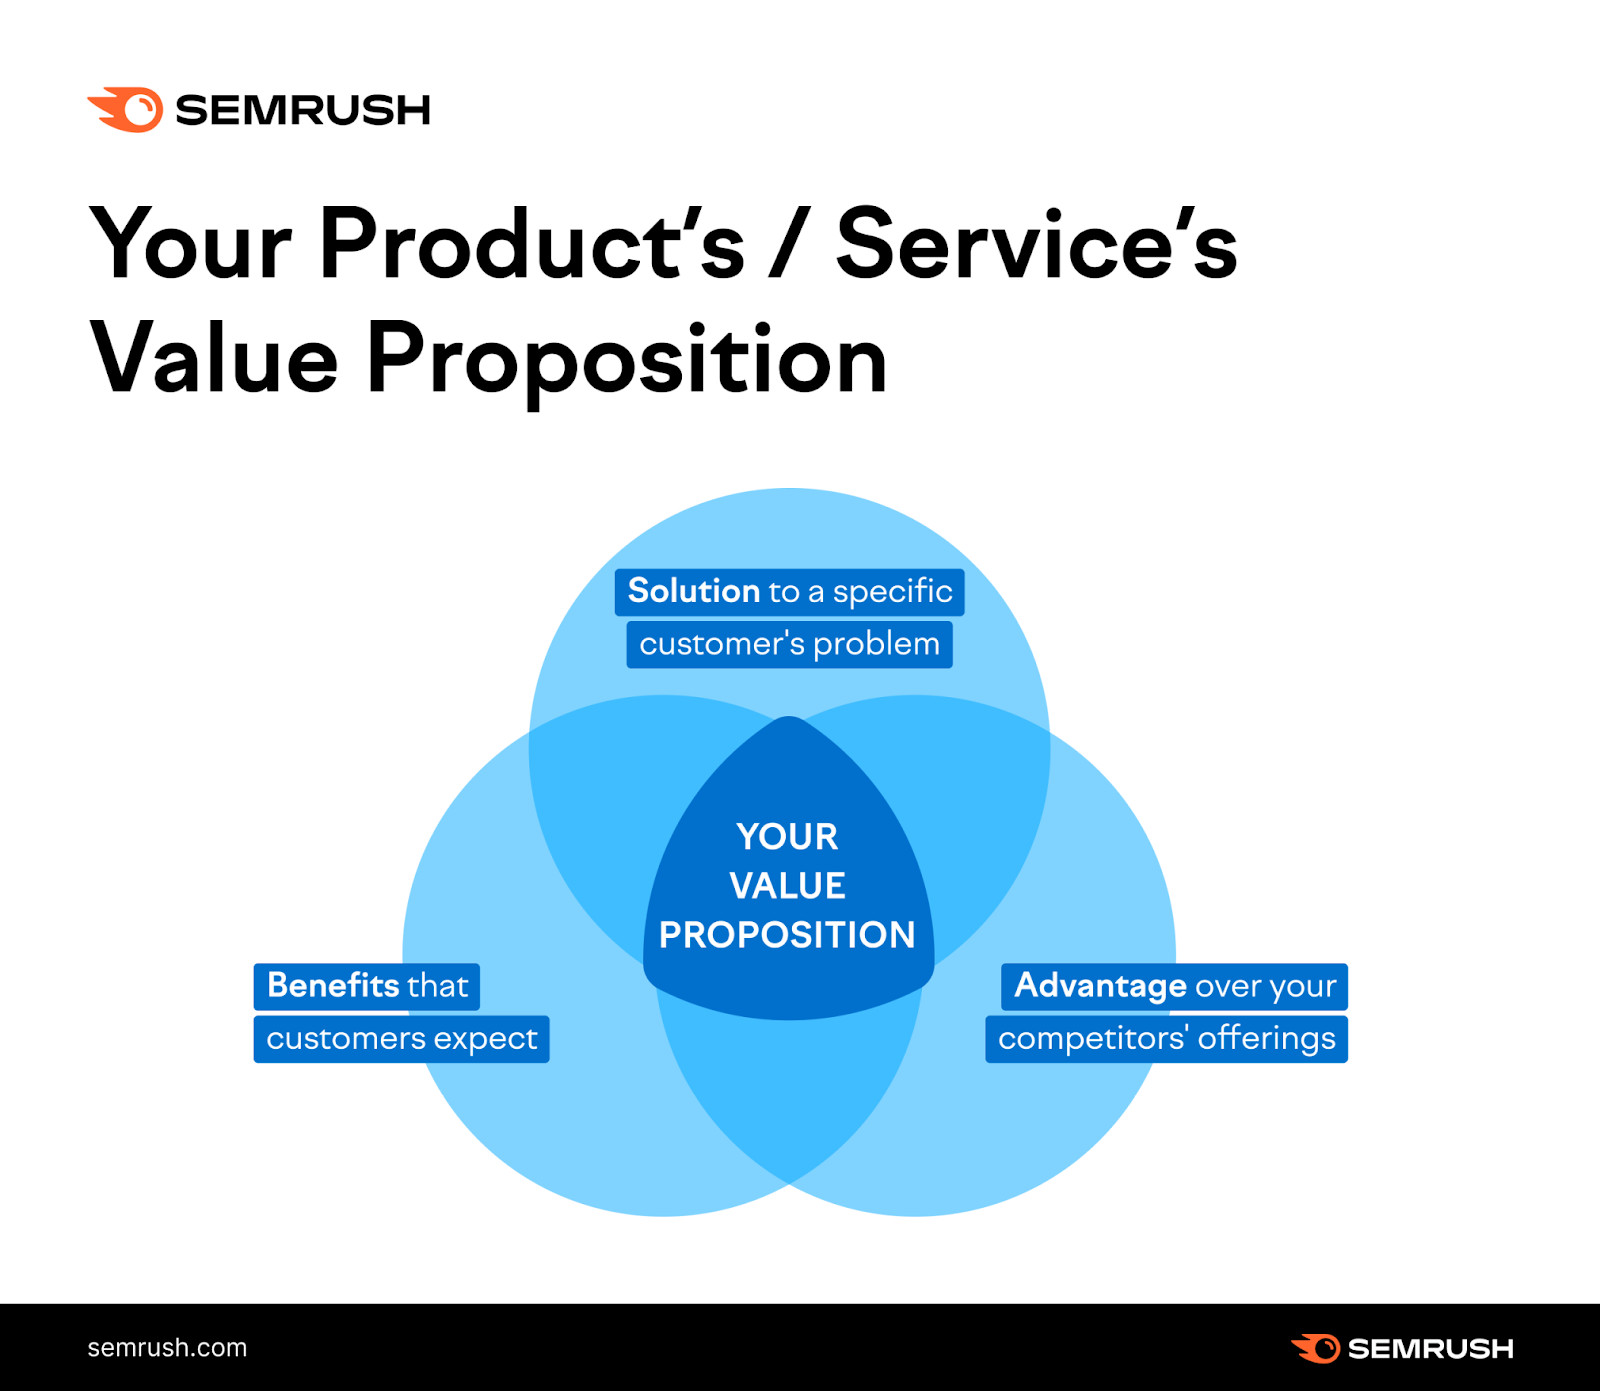 An infographic showing what your product/services’s value proposition is